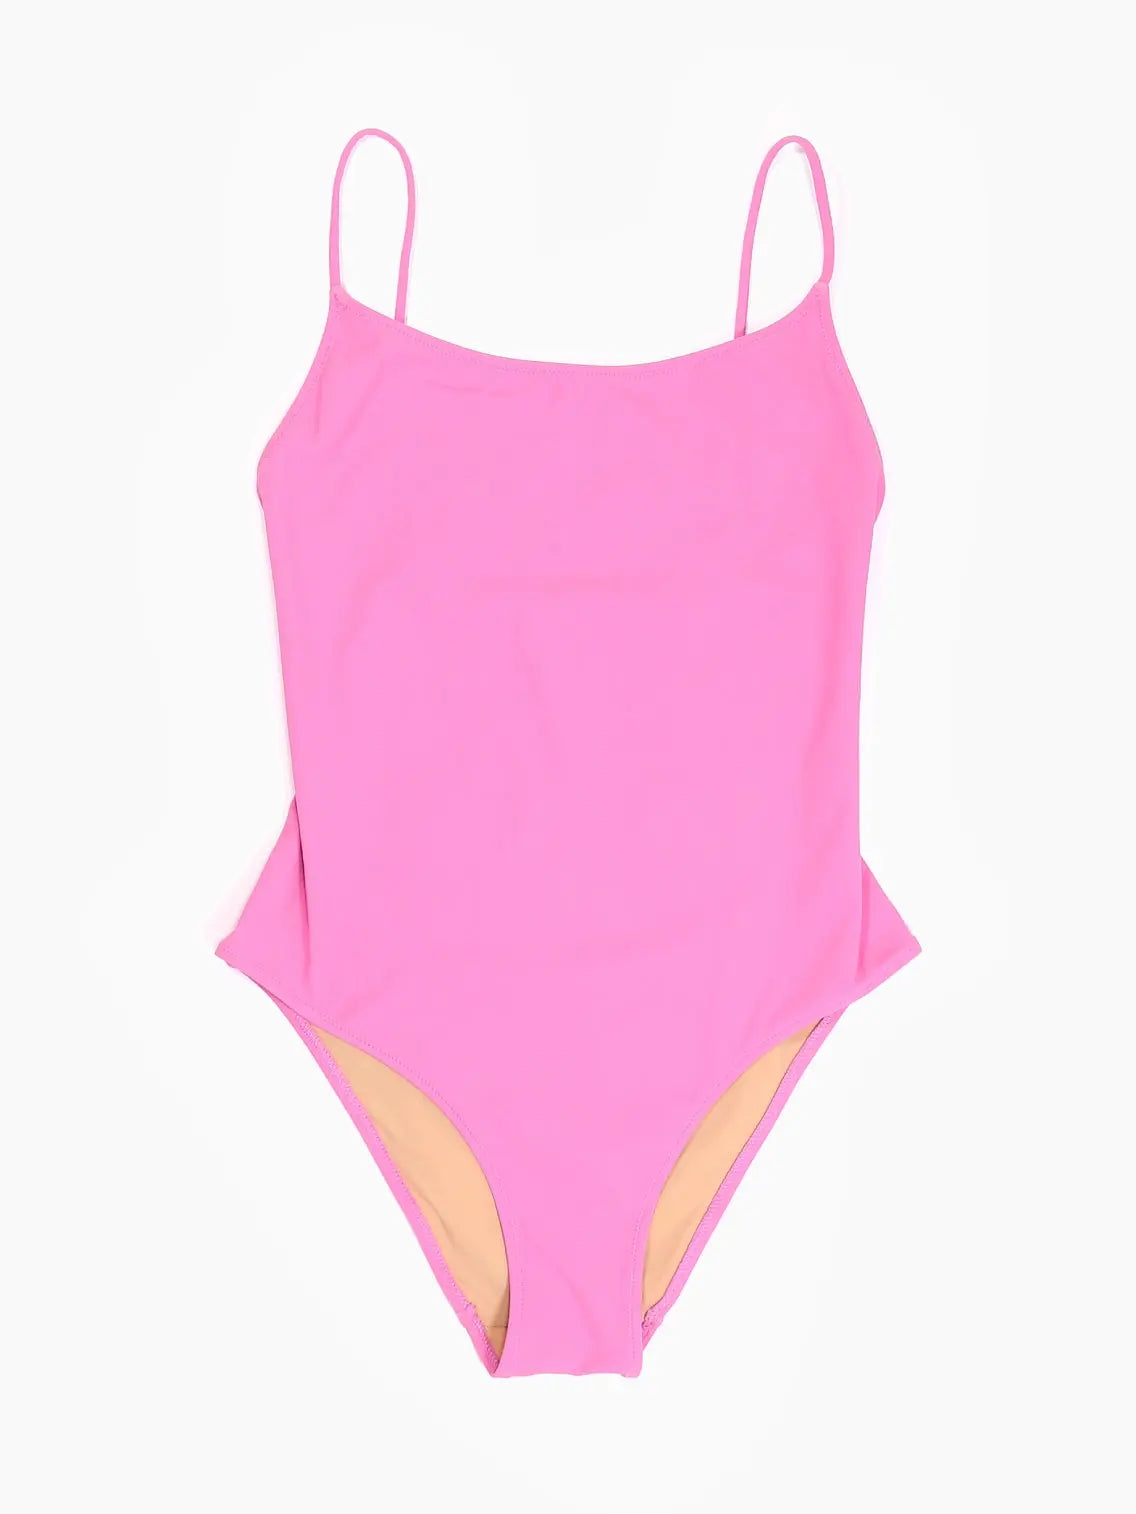 A bright pink one-piece swimsuit with thin shoulder straps and a high-cut design is showcased on a white background, highlighting its simple yet stylish look. This elegant piece, Trentasei Swimwear Pink by Lido, available exclusively at Bassalstore, perfectly captures the vibrant spirit of Barcelona fashion.